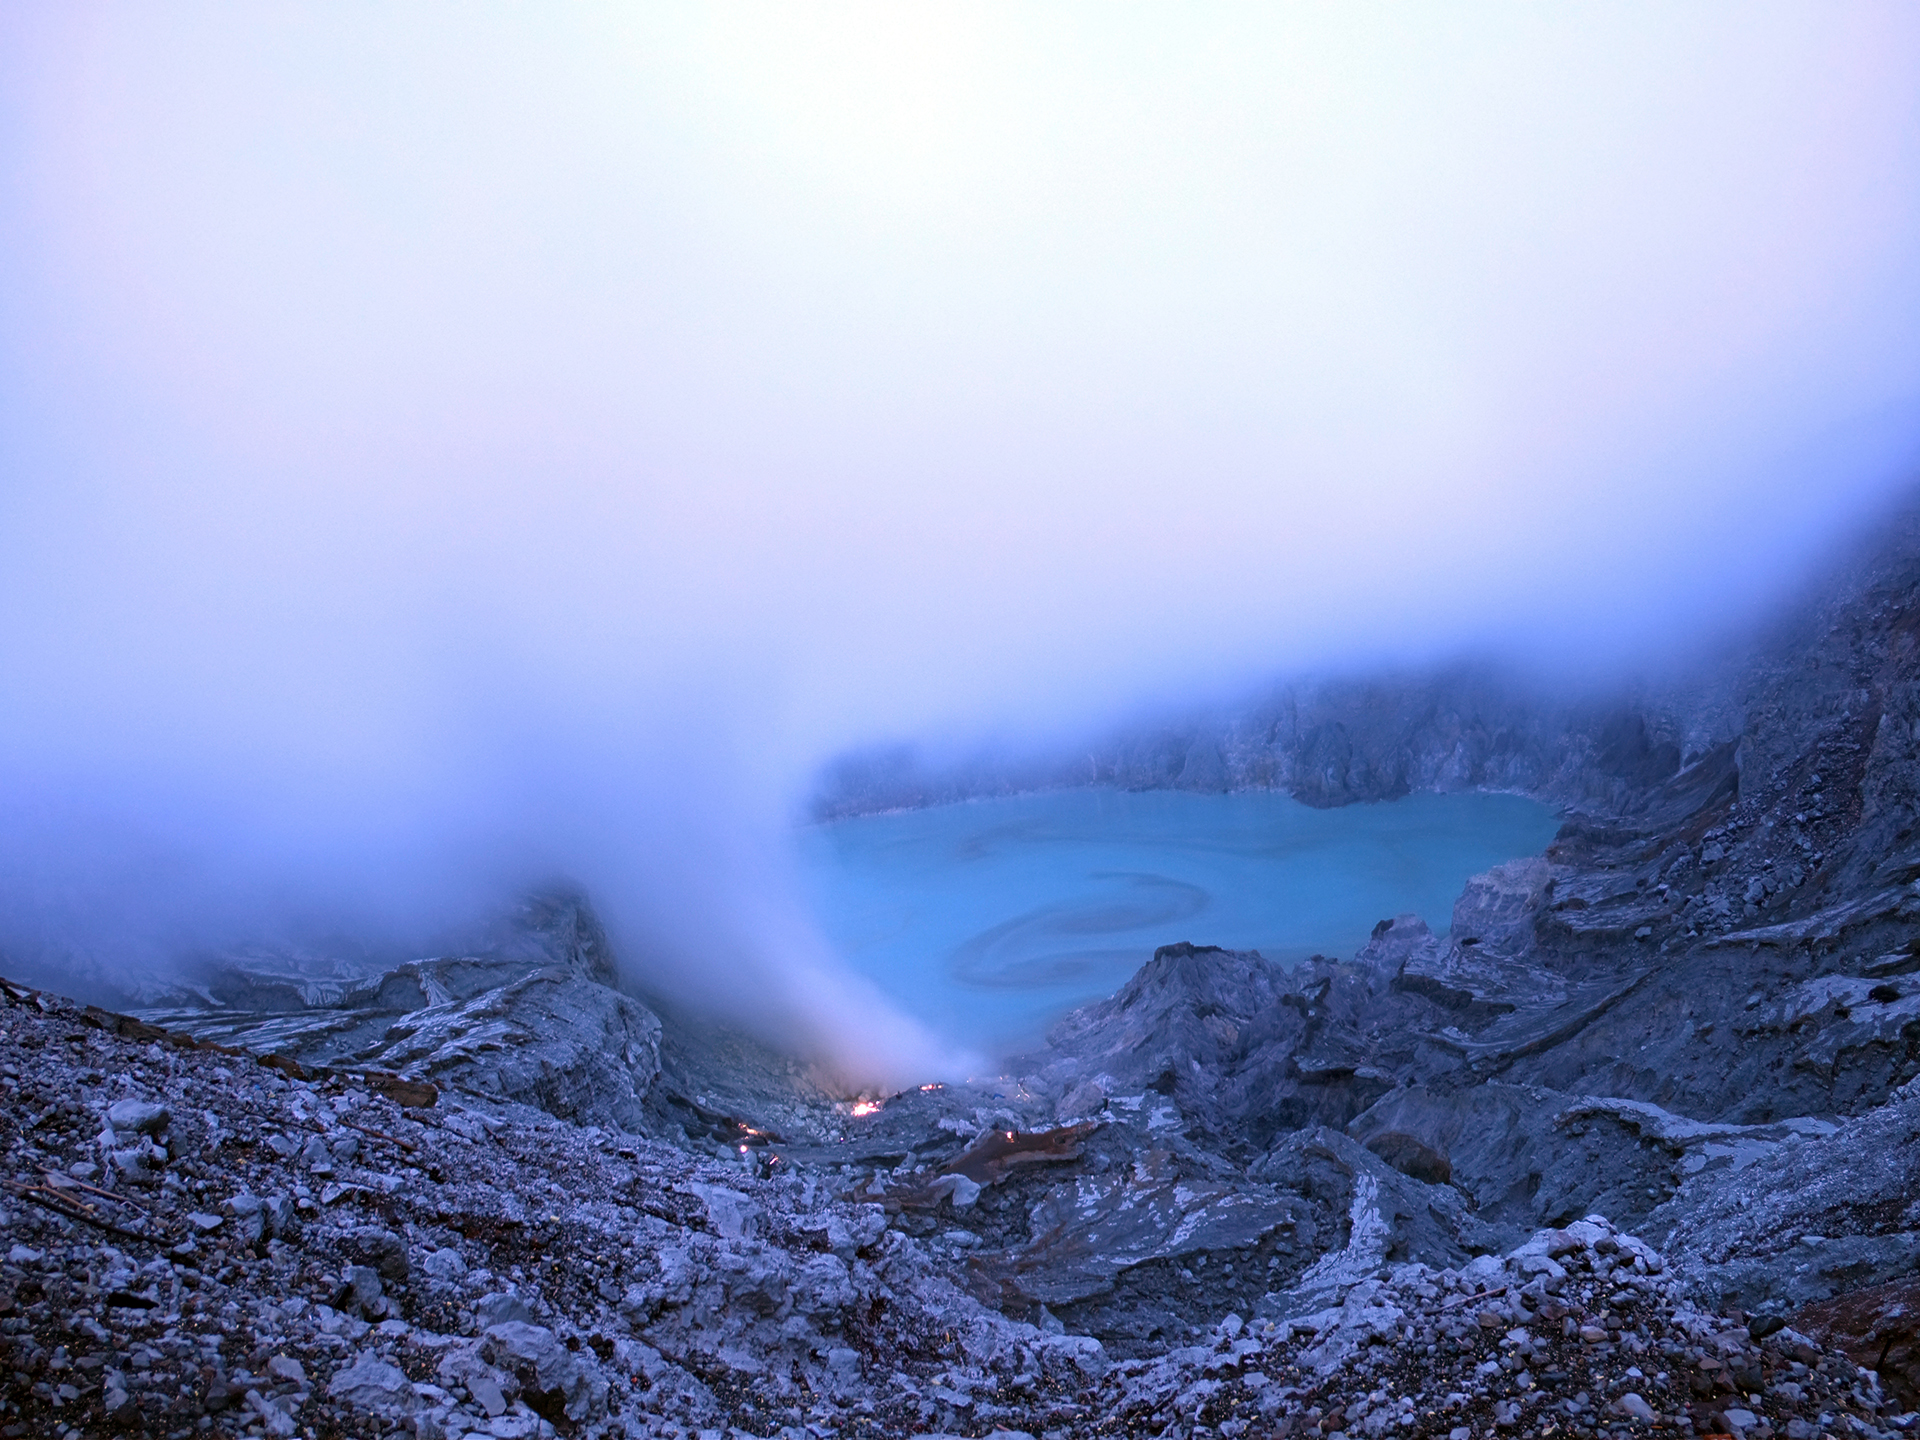 The Ijen, descent into the forecourt of hell